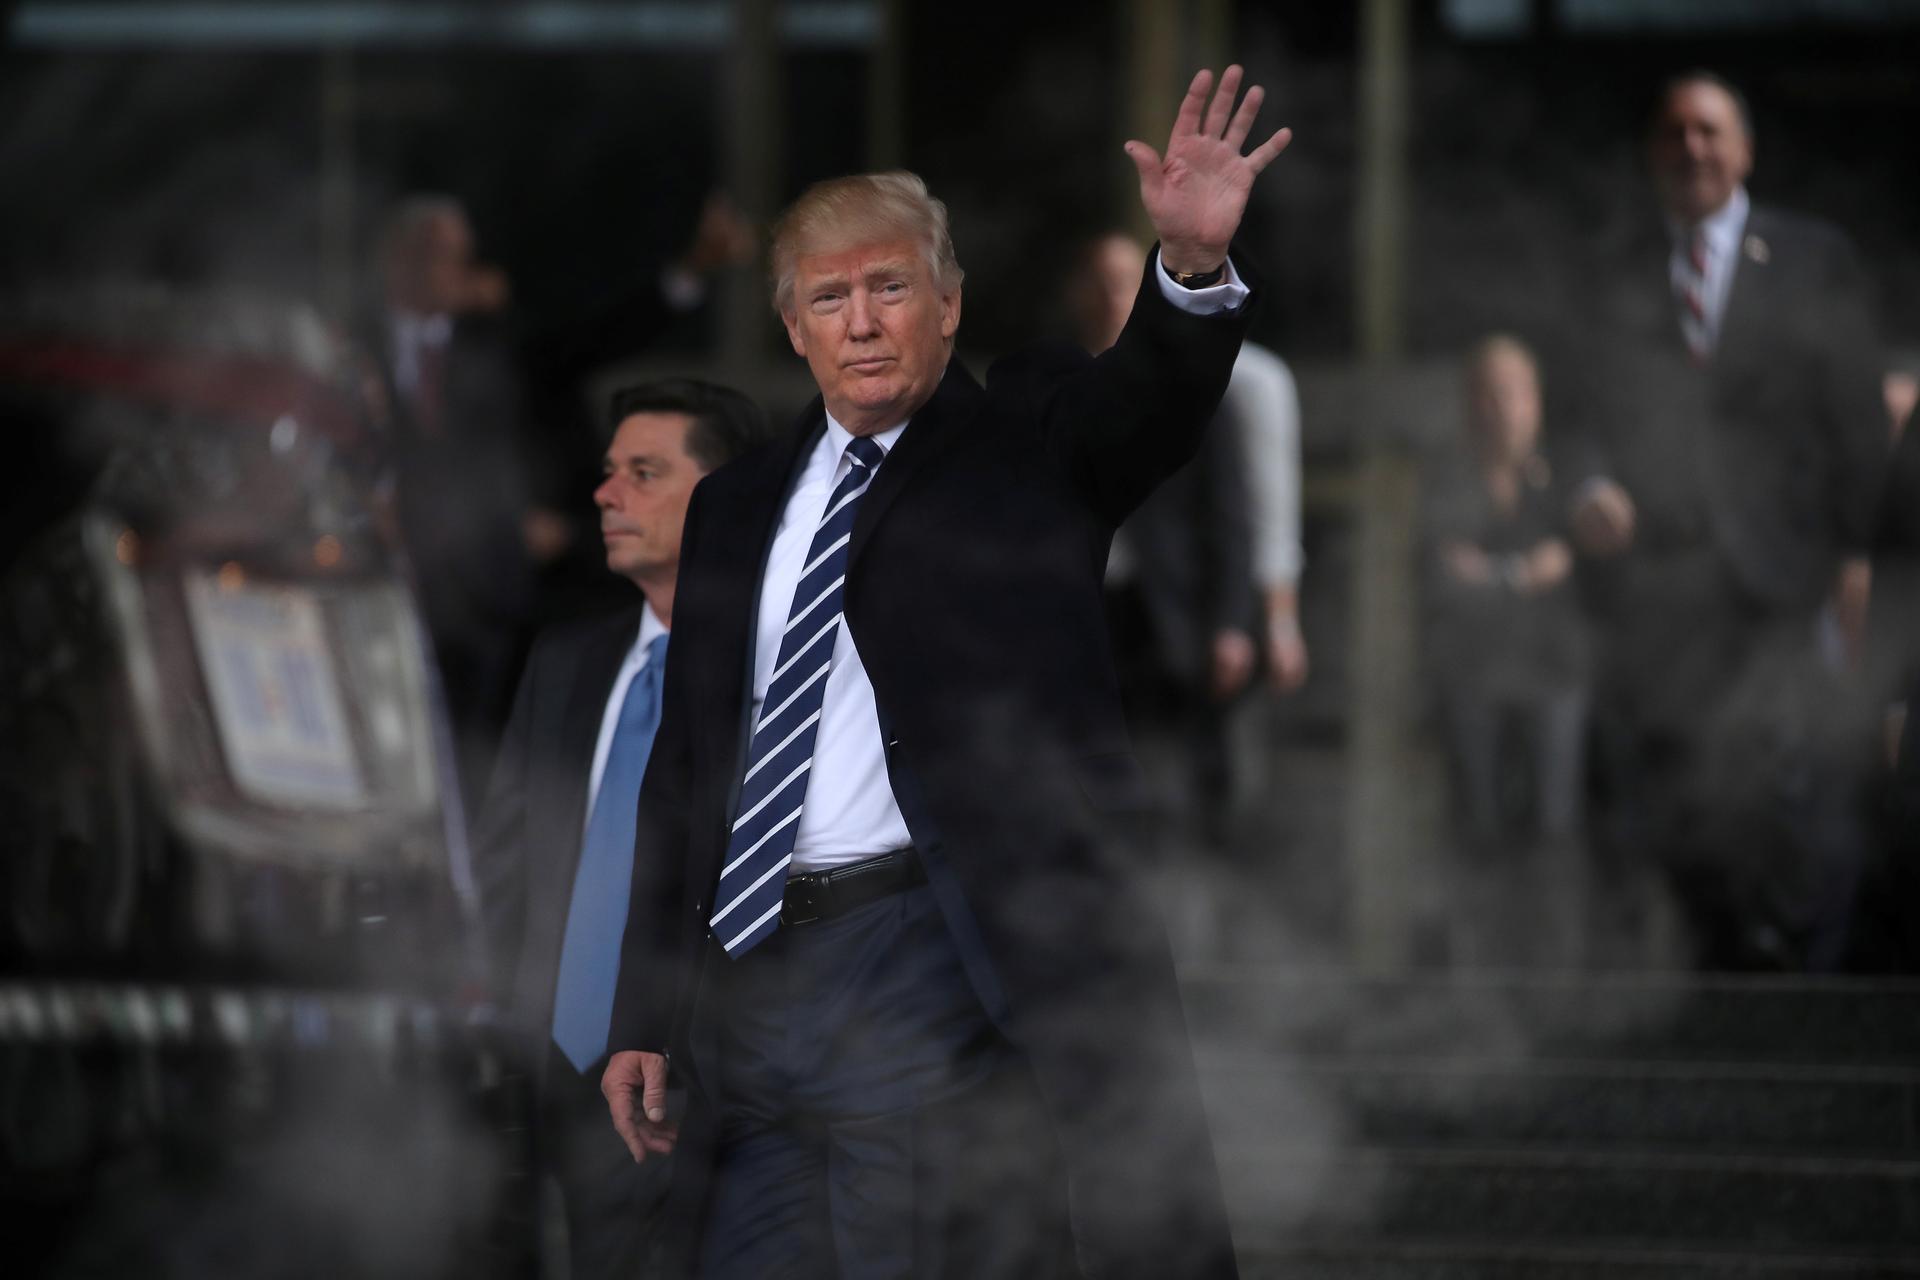 US President Donald Trump waves as he leaves the CIA headquarters